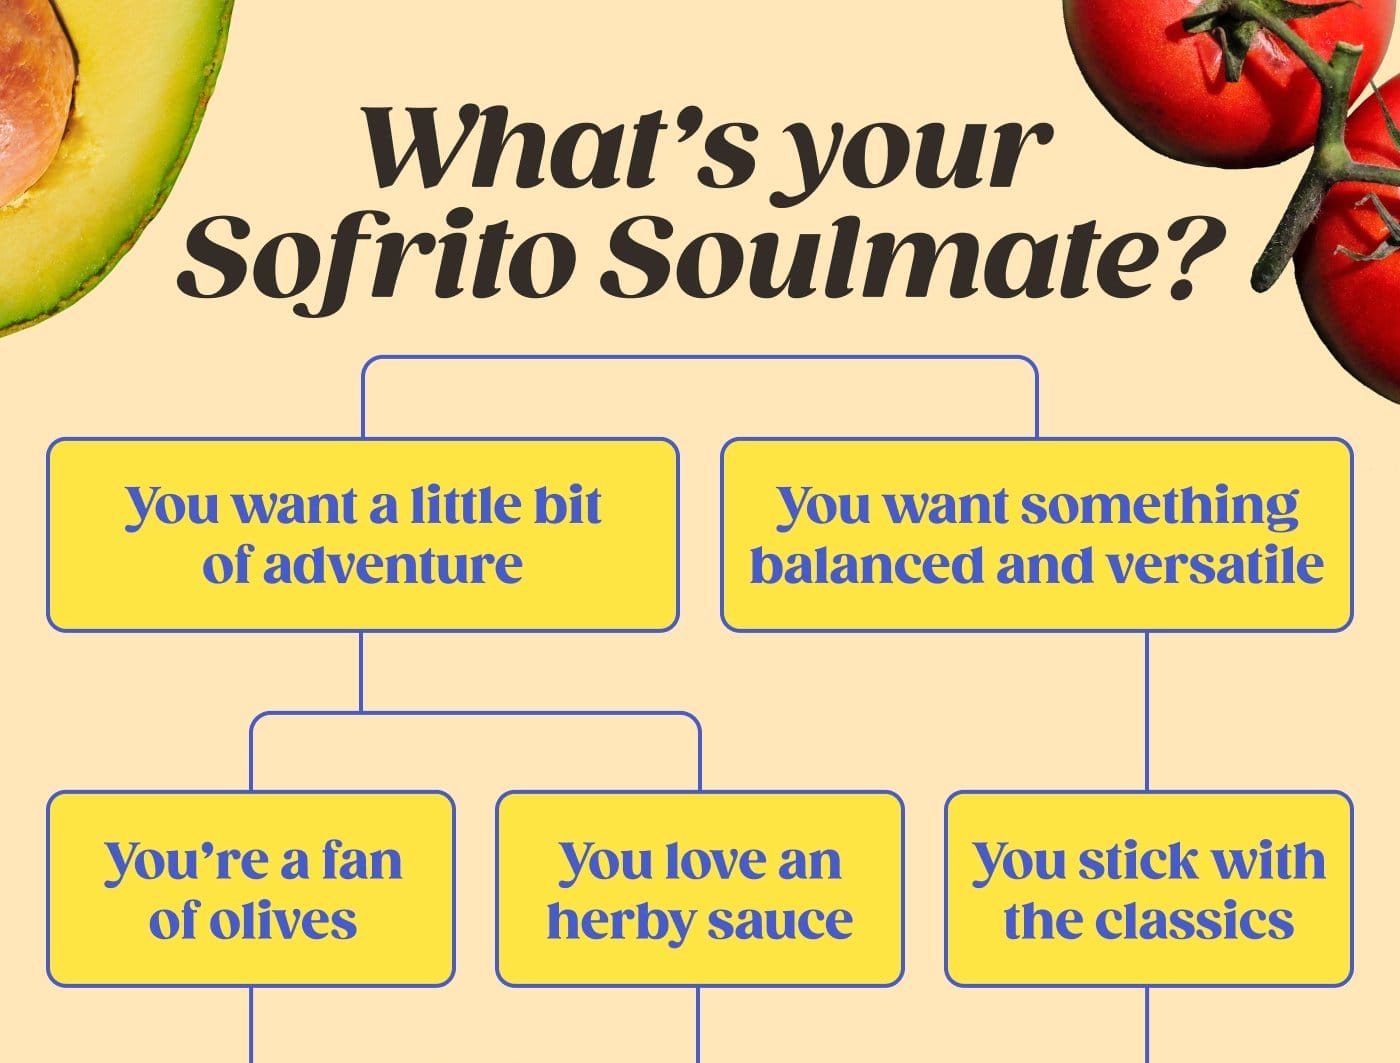 What's your Sofrito Soulmate?